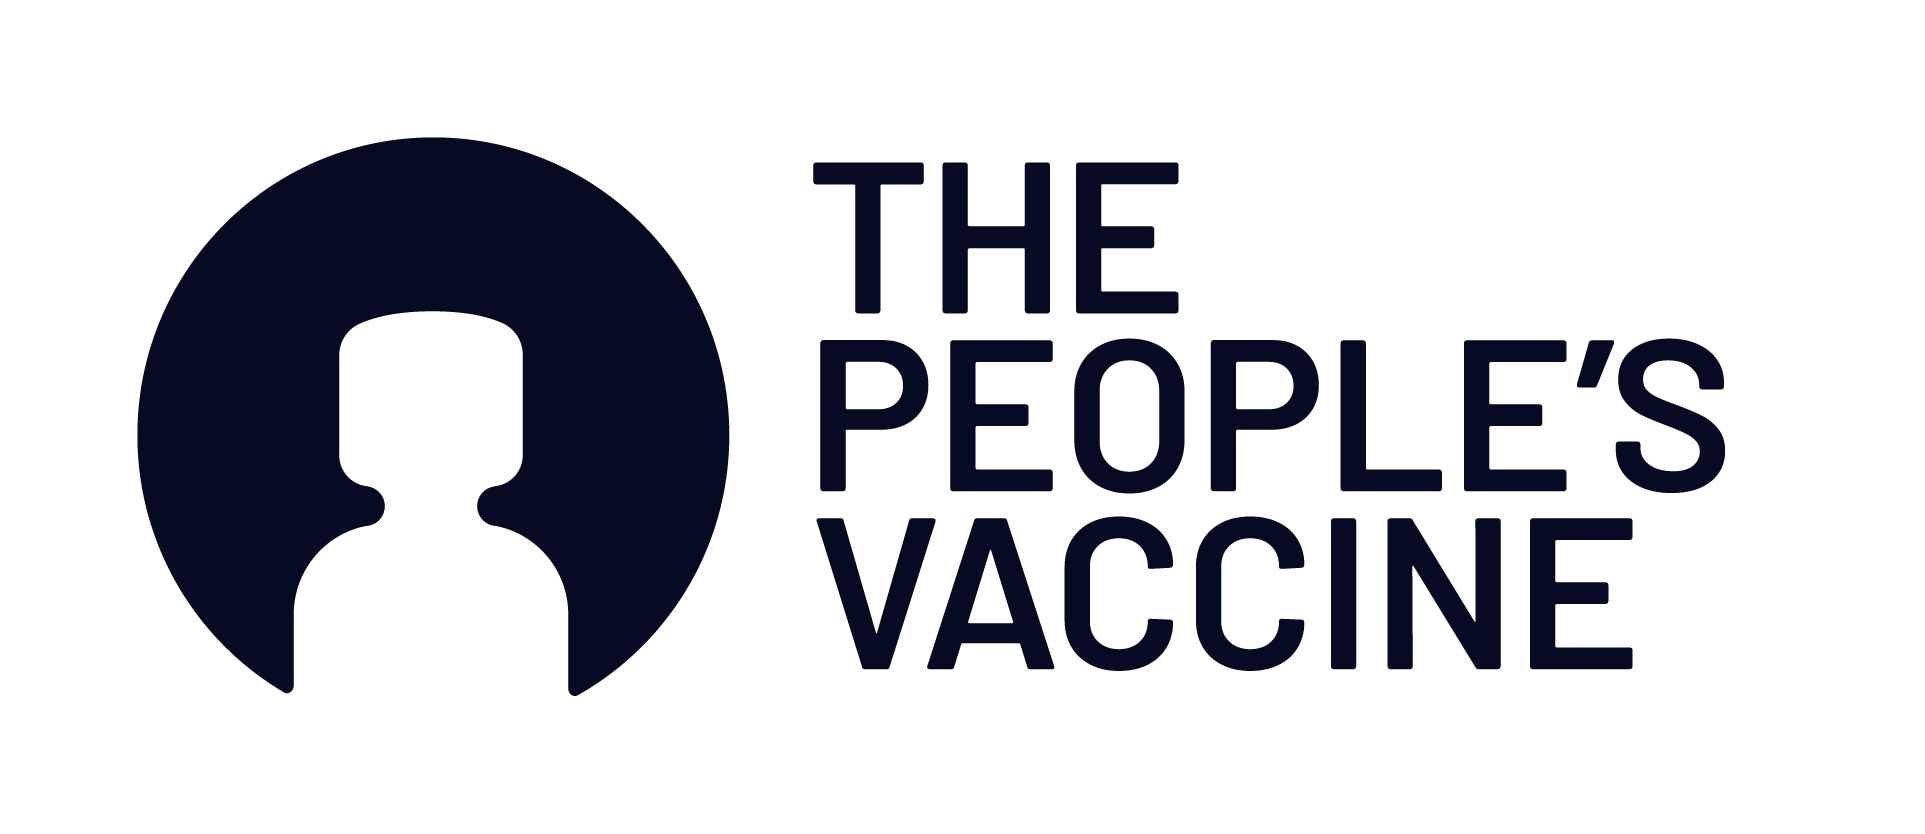 Open Letter Former Heads Of State And Nobel Laureates Call On President Biden To Waive Intellectual Property Rules For Covid Vaccines By People S Vaccine Alliance Apr 21 Medium